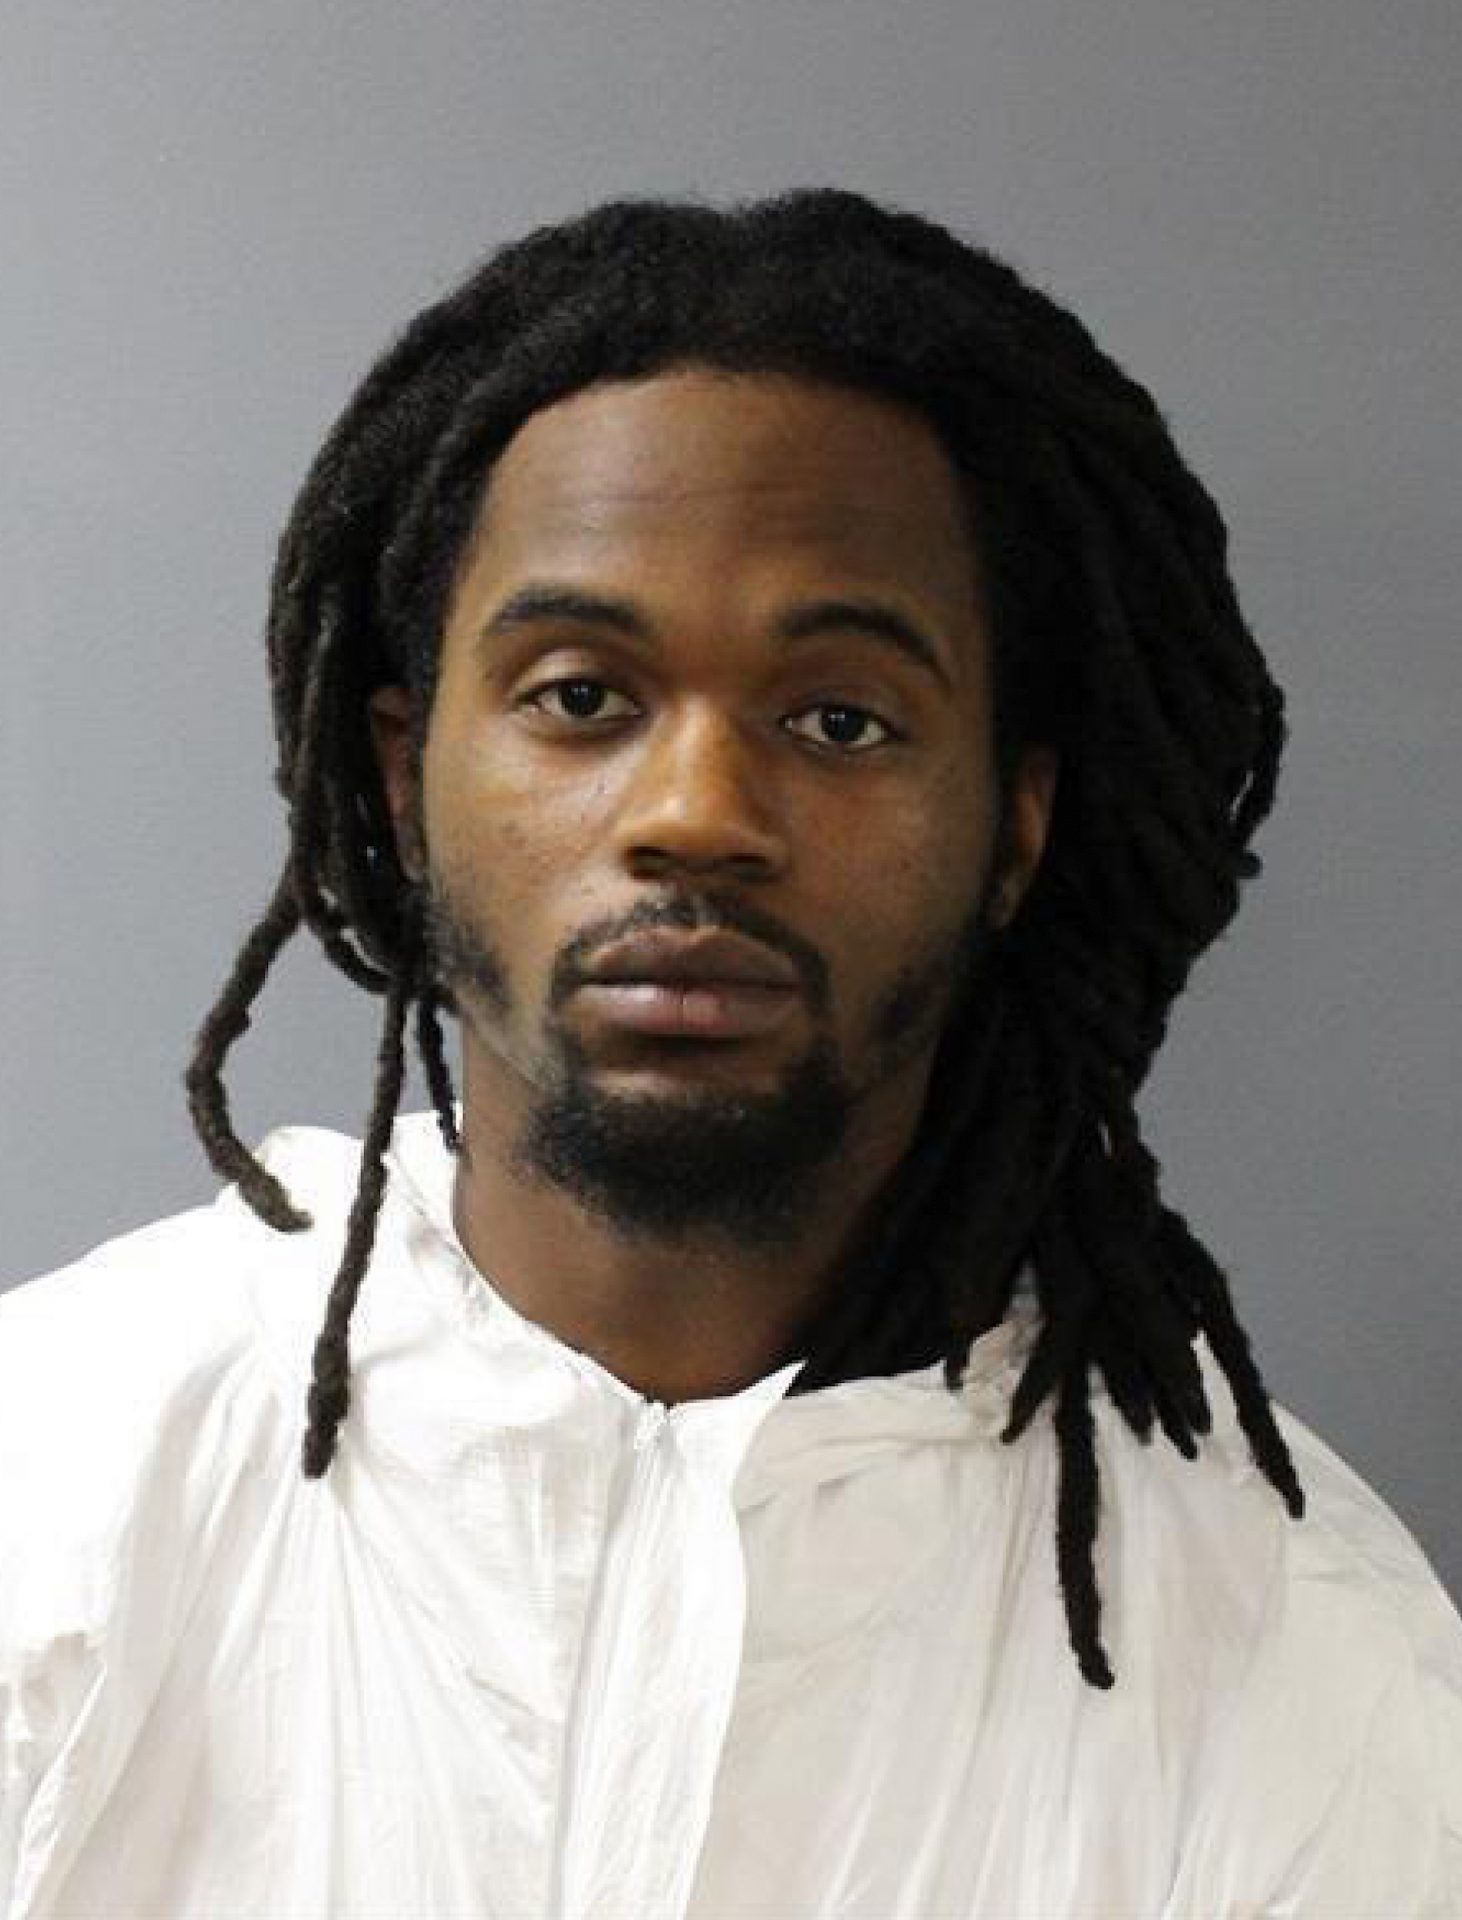 This undated image released by The Lebanon County, Pa., Correctional Facility shows Eric McGill, awaiting trial in a shooting case. McGill, a Pennsylvania inmate whose dreadlocks violated a county jail's haircut policy has been released from solitary confinement after more than a year, although his federal lawsuit is still pending. A federal magistrate judge on Wednesday, May 6, 2020, granted the request by McGill to withdraw his motion for a preliminary injunction, because the Lebanon County Correctional Facility adopted a religious exception to its dreadlocks ban and let him out of solitary on April 23.